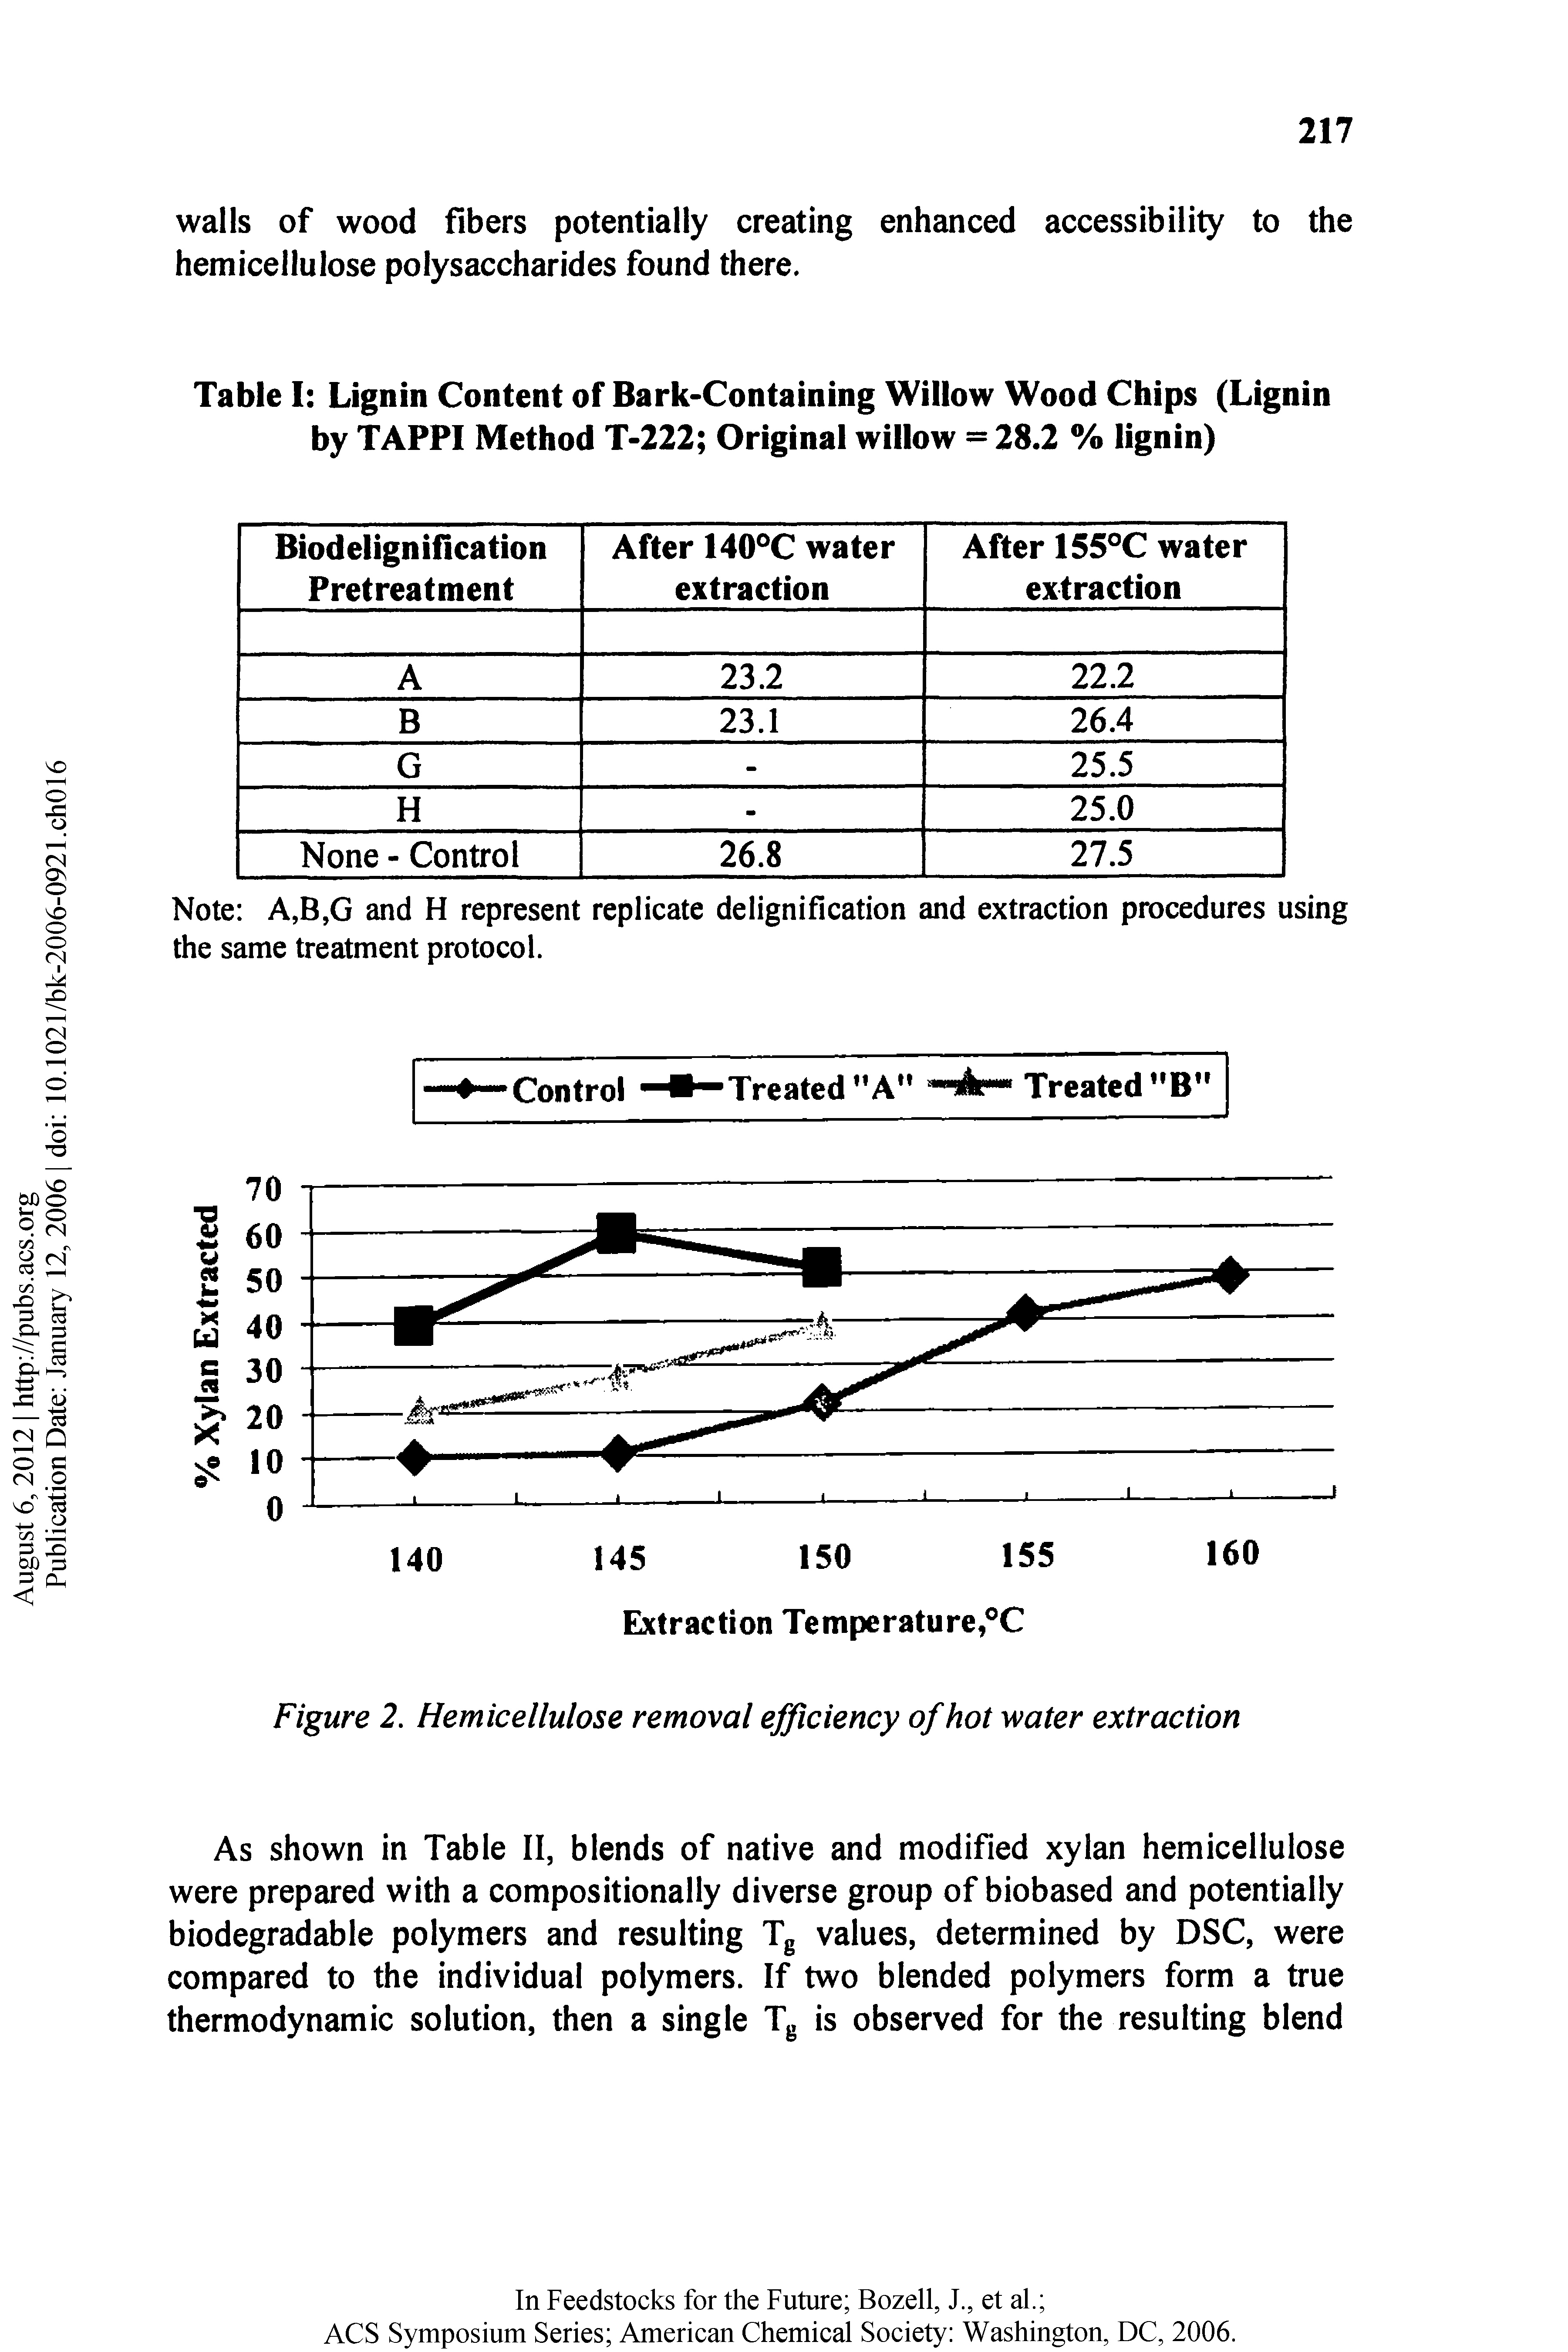 Figure 2. Hemicellulose removal efficiency of hot water extraction...